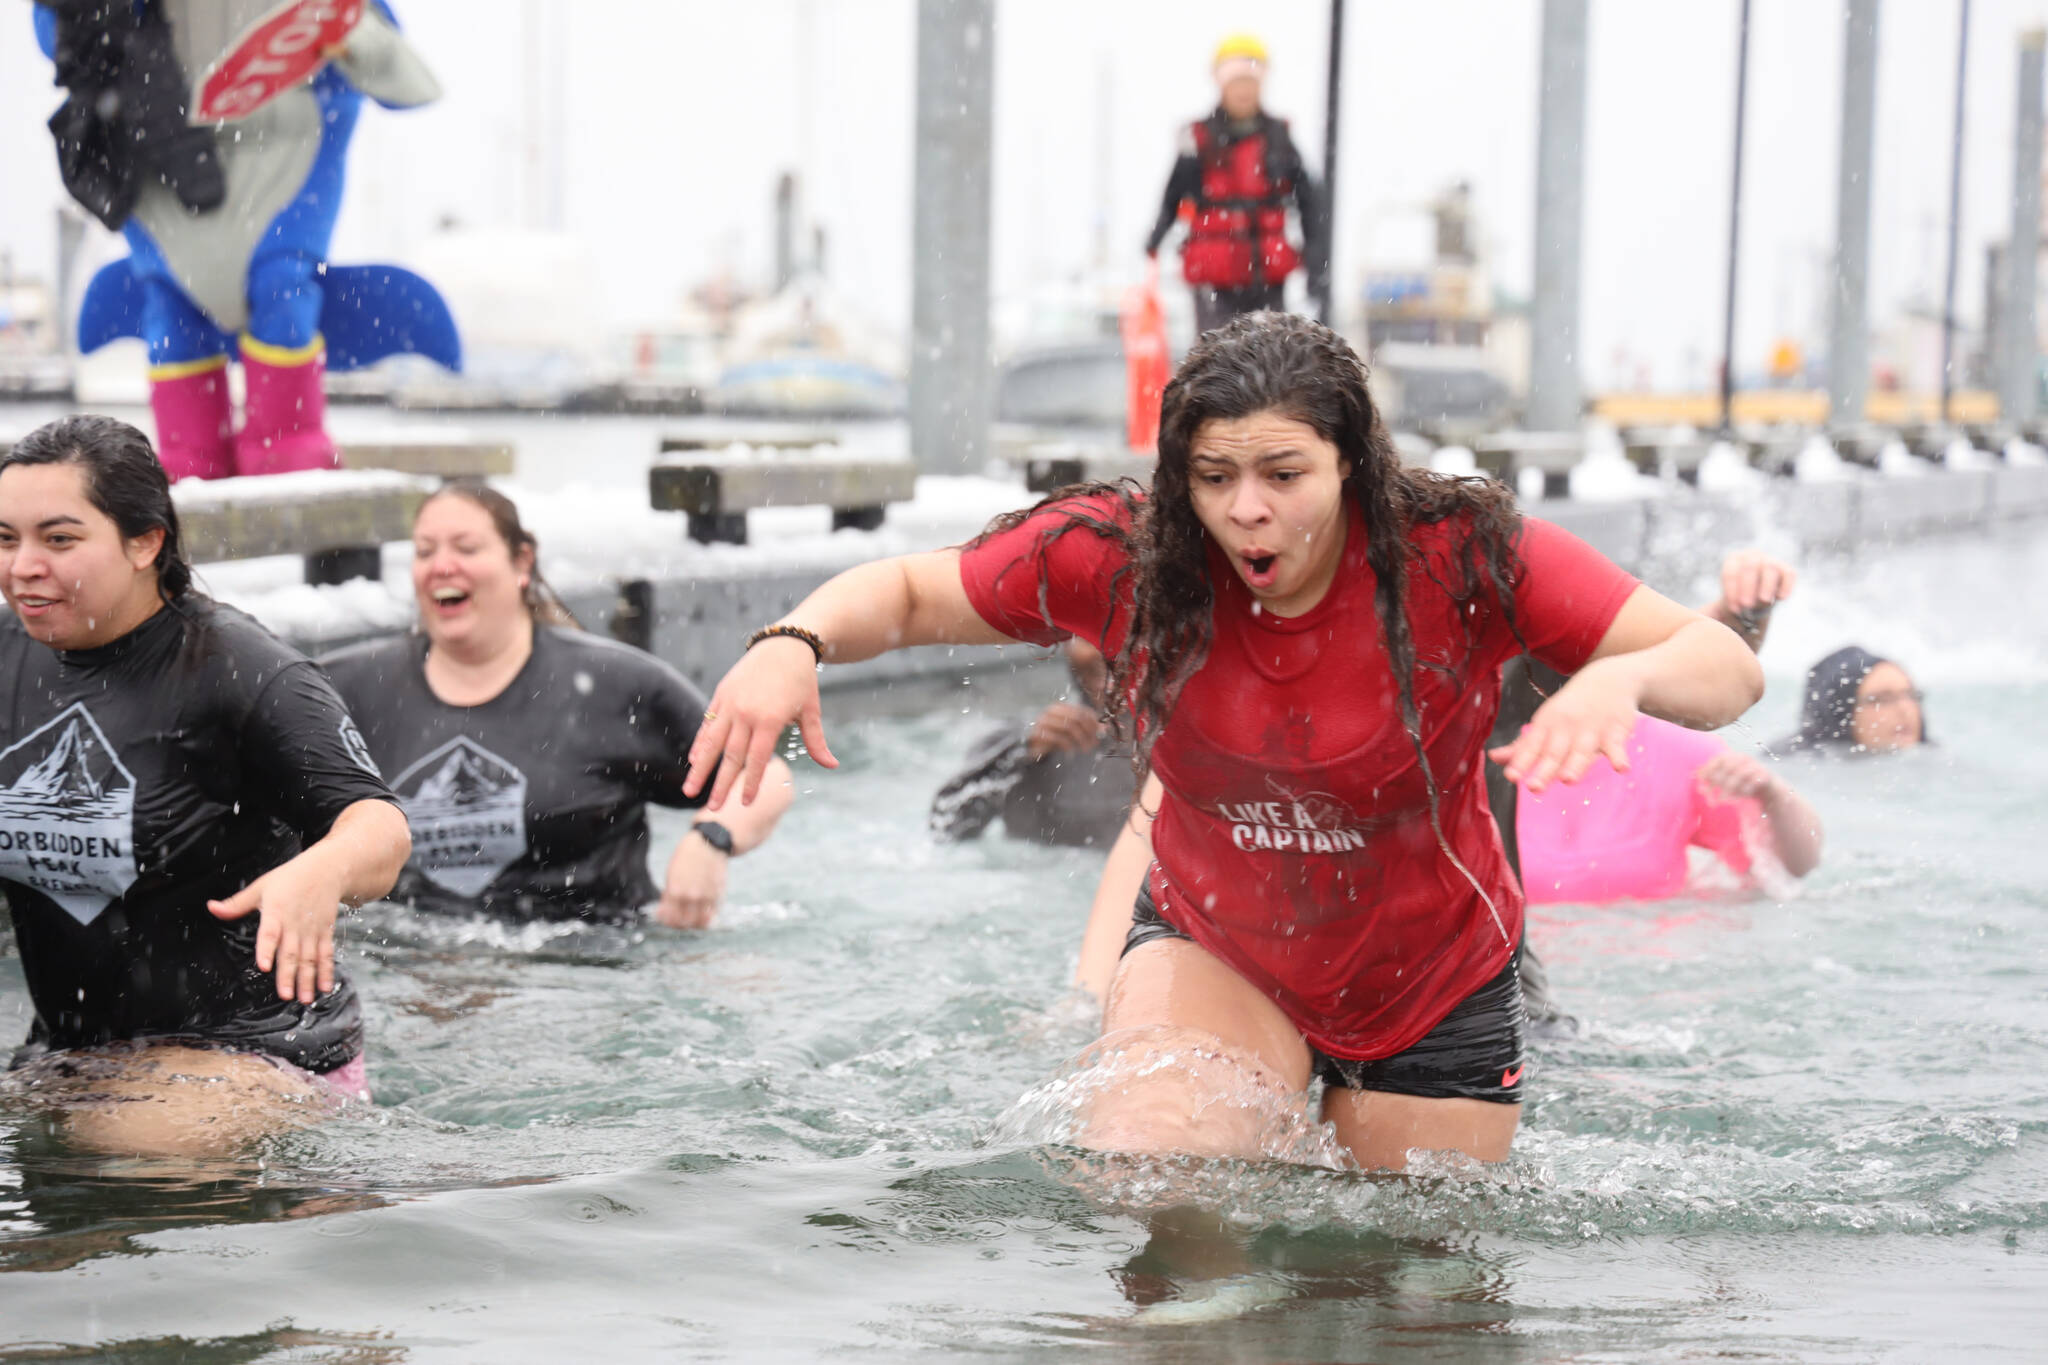 University of Alaska Southeast students run out of the freezing water after jumping into the waters of Auke Bay on Saturday afternoon for the 25th UAS Polar Plunge. (Clarise Larson / Juneau Empire)